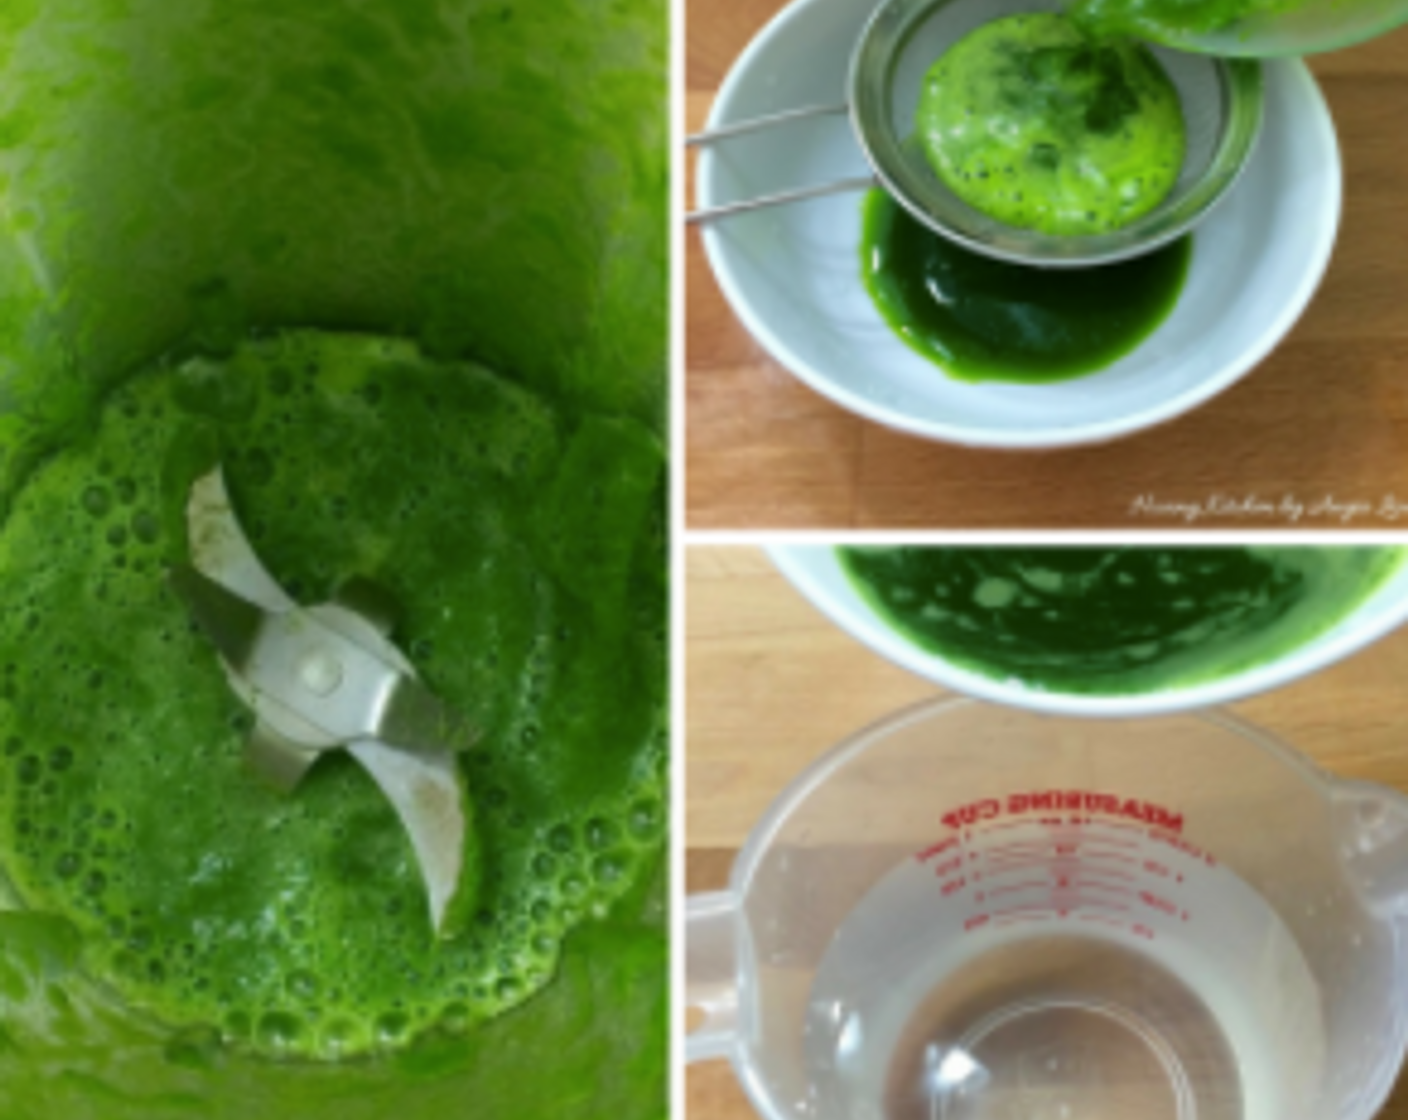 step 4 Meanwhile make pandan juice by blending Pandan Leaves (to taste) and Water (2 1/2 cups). Strain the juice and top up with more water to 600ml.